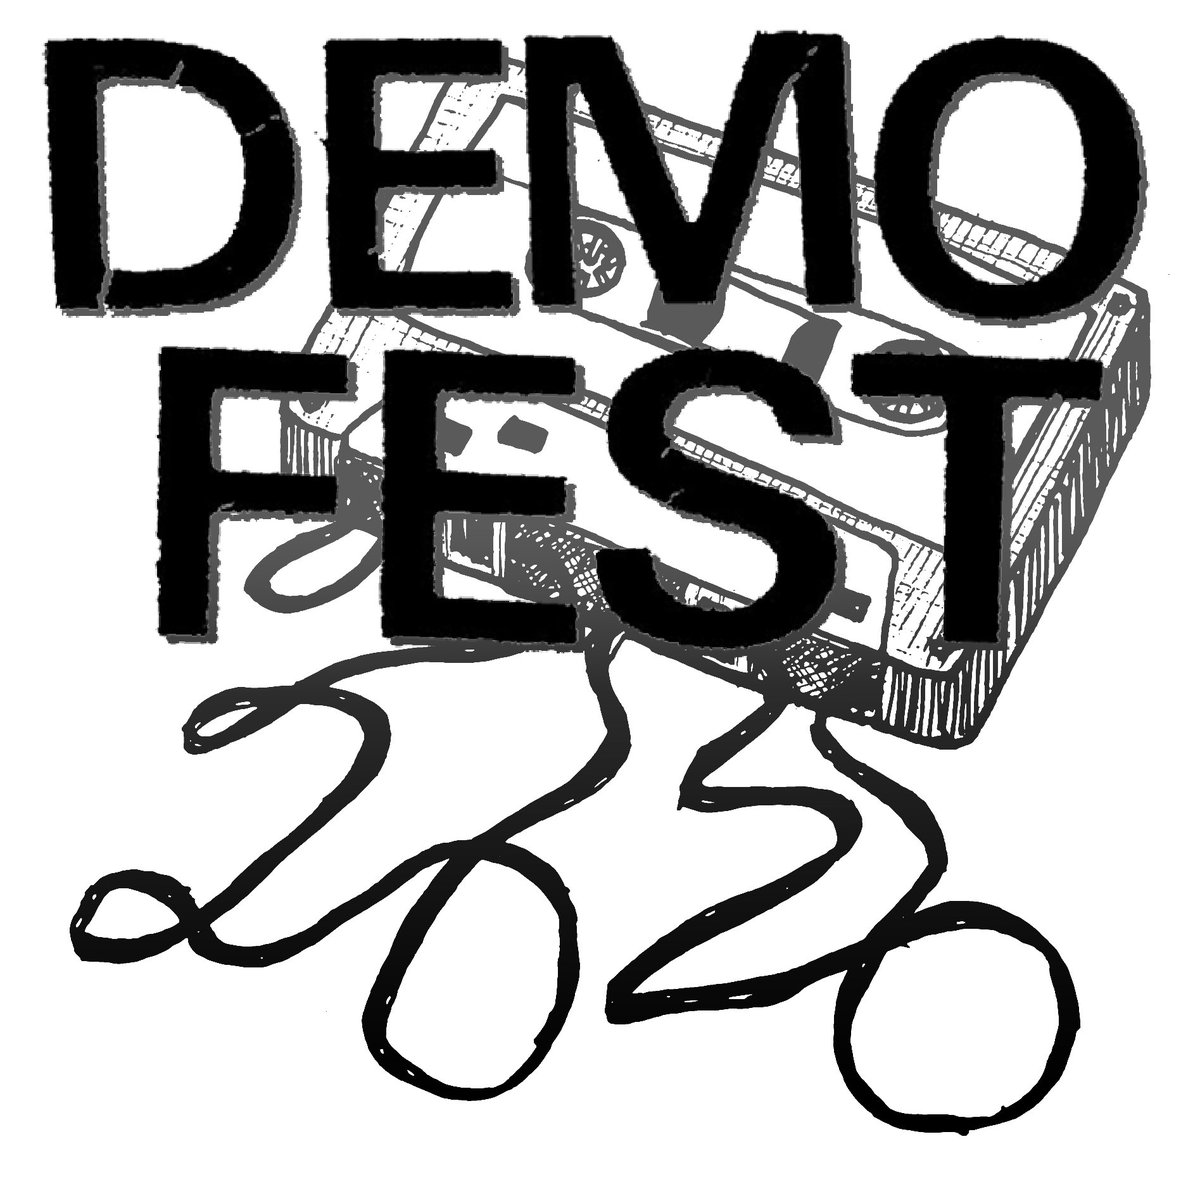 Get ready for December 1, the launch date for Demo-Fest 2020, where hundreds (literally!) of musicians will share brand new music to benefit the SAB mutual aid fund!

demo-fest.org

#StatusForAll #UpThePunks